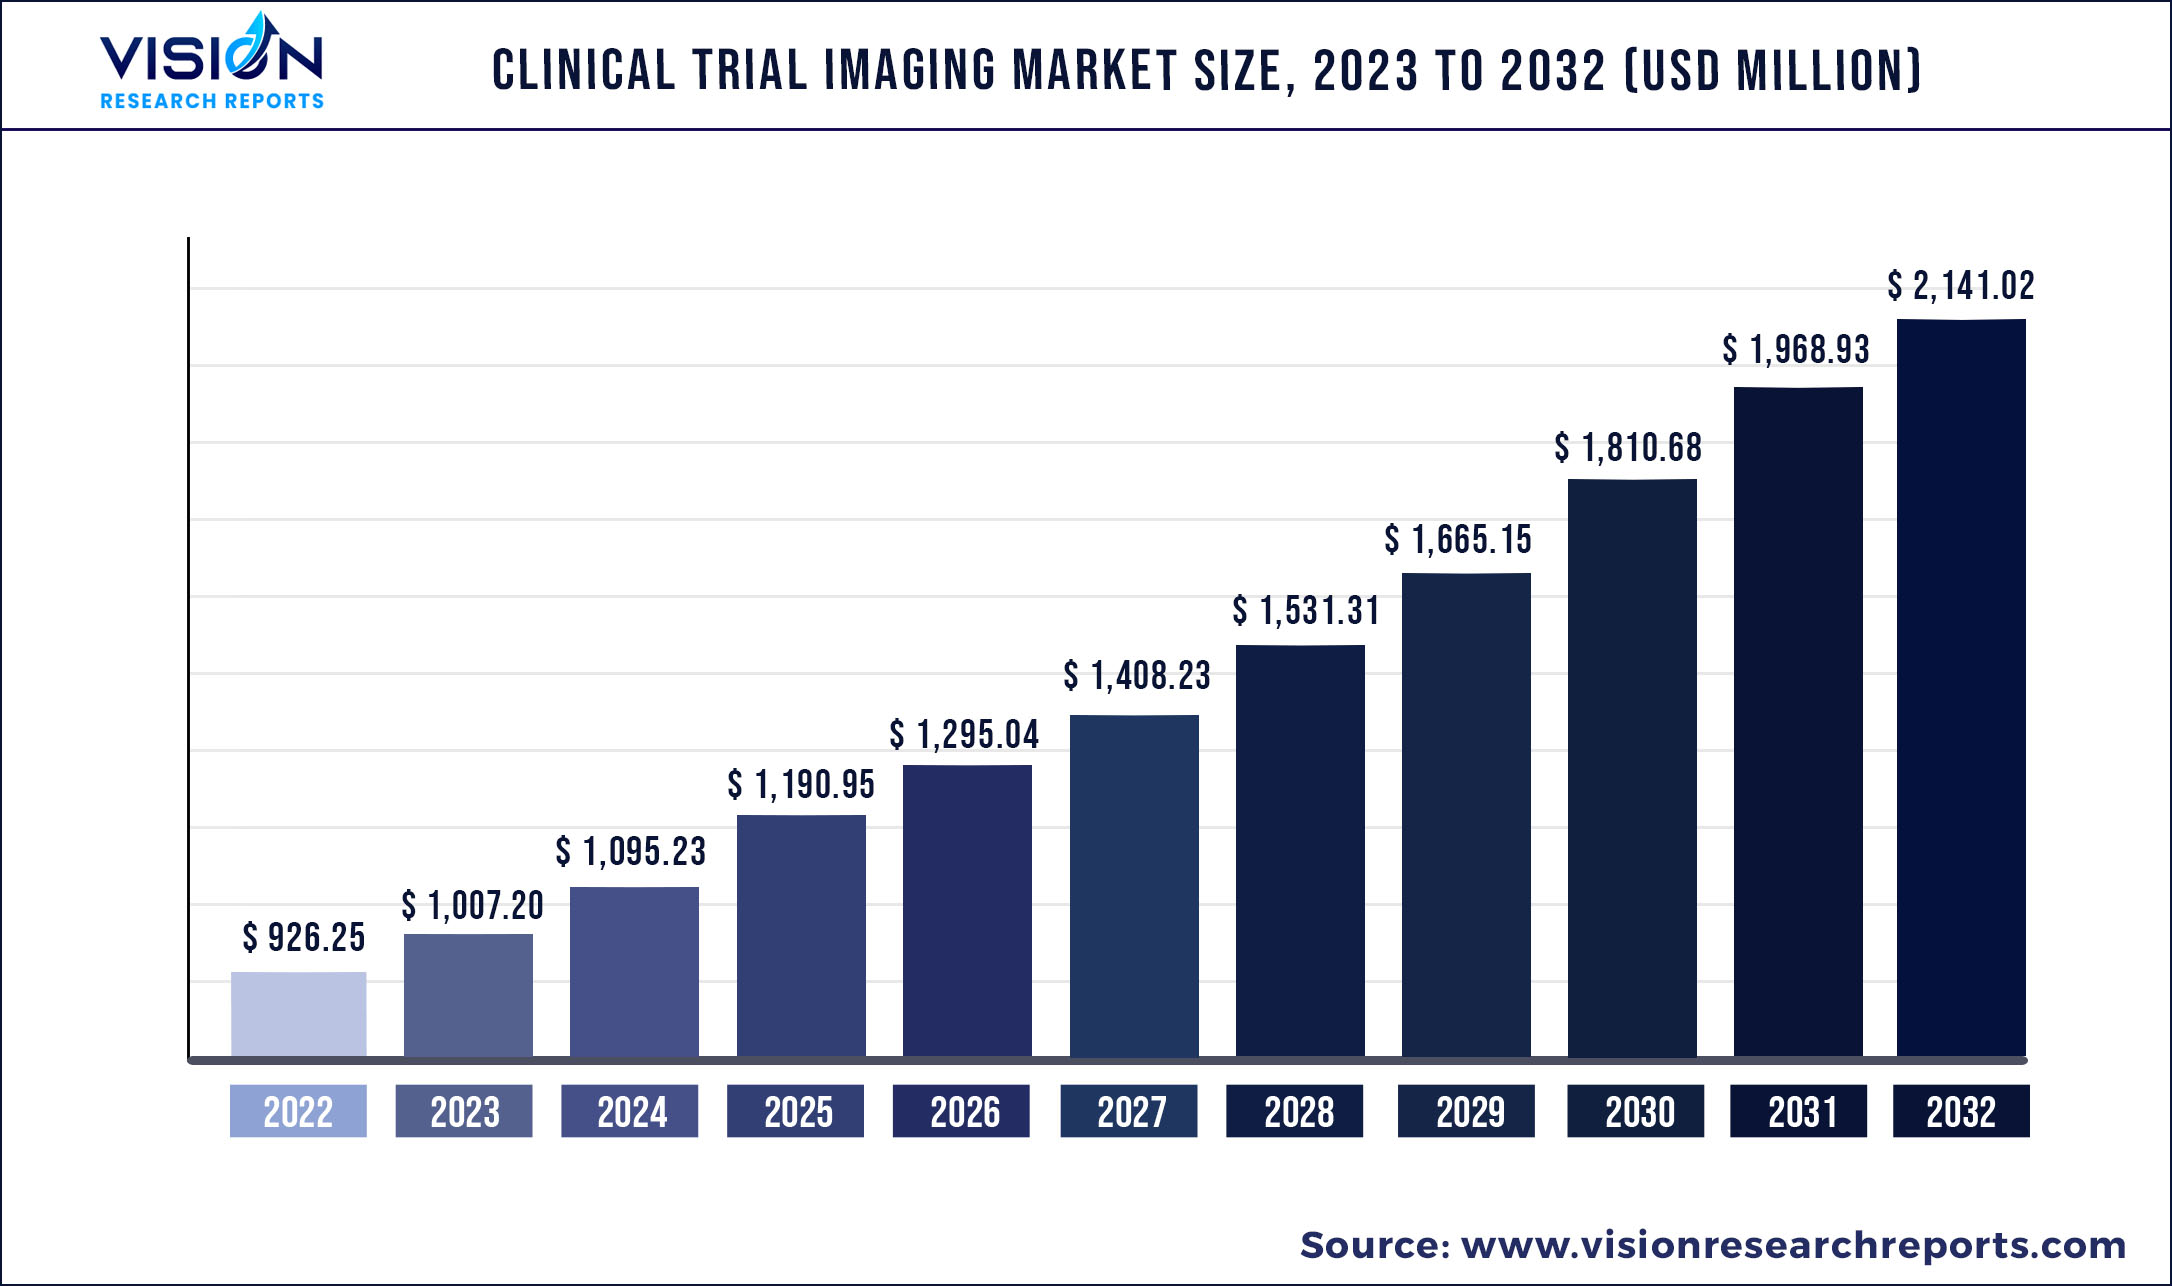 Clinical Trial Imaging Market Size 2023 to 2032